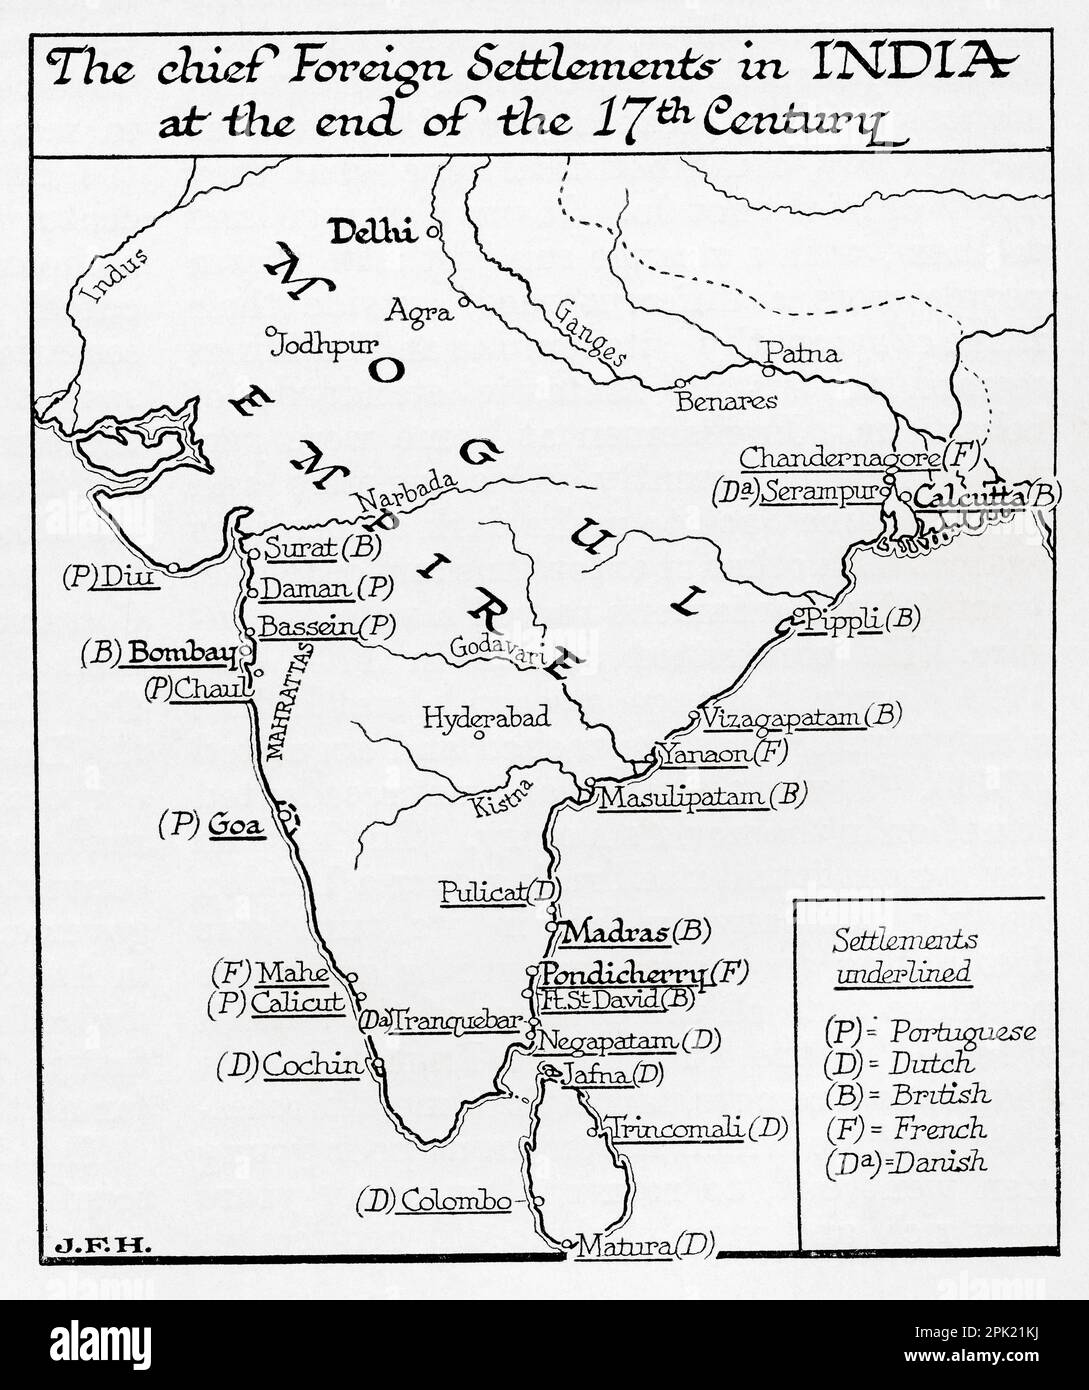 Map of the chief foreign settlements in India at the end of the 17th century.  From the book Outline of History by H.G. Wells, published 1920. Stock Photo